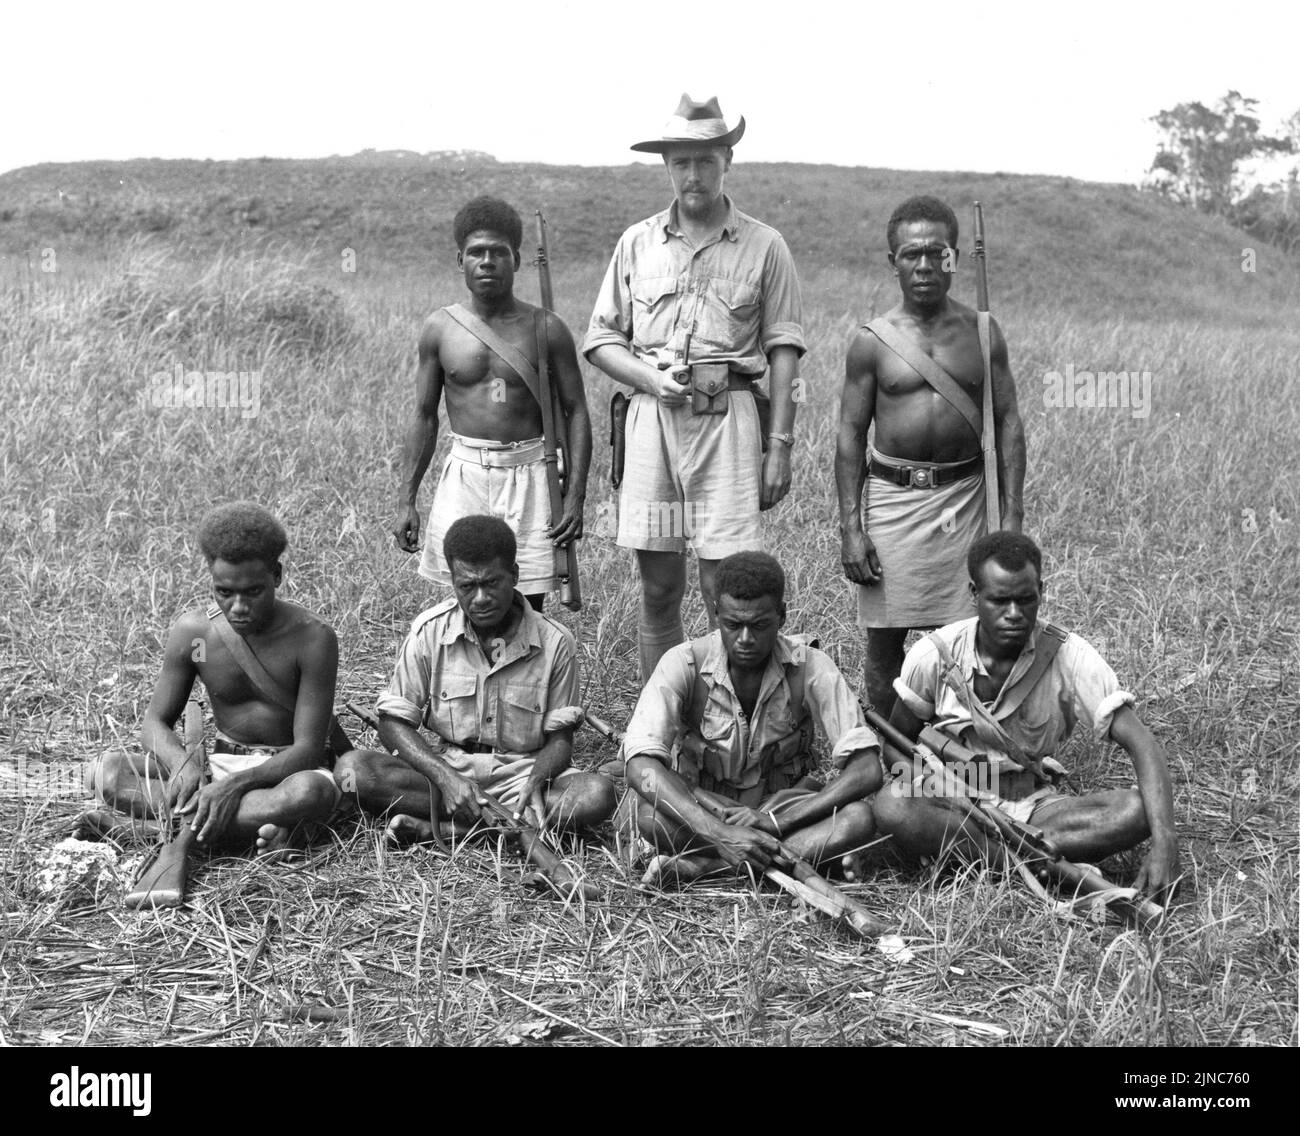 An Australian coastwatcher on Guadalcanal. The image shows Captain Martin Clemens and native members of the Solomon Islands police force. Stock Photo